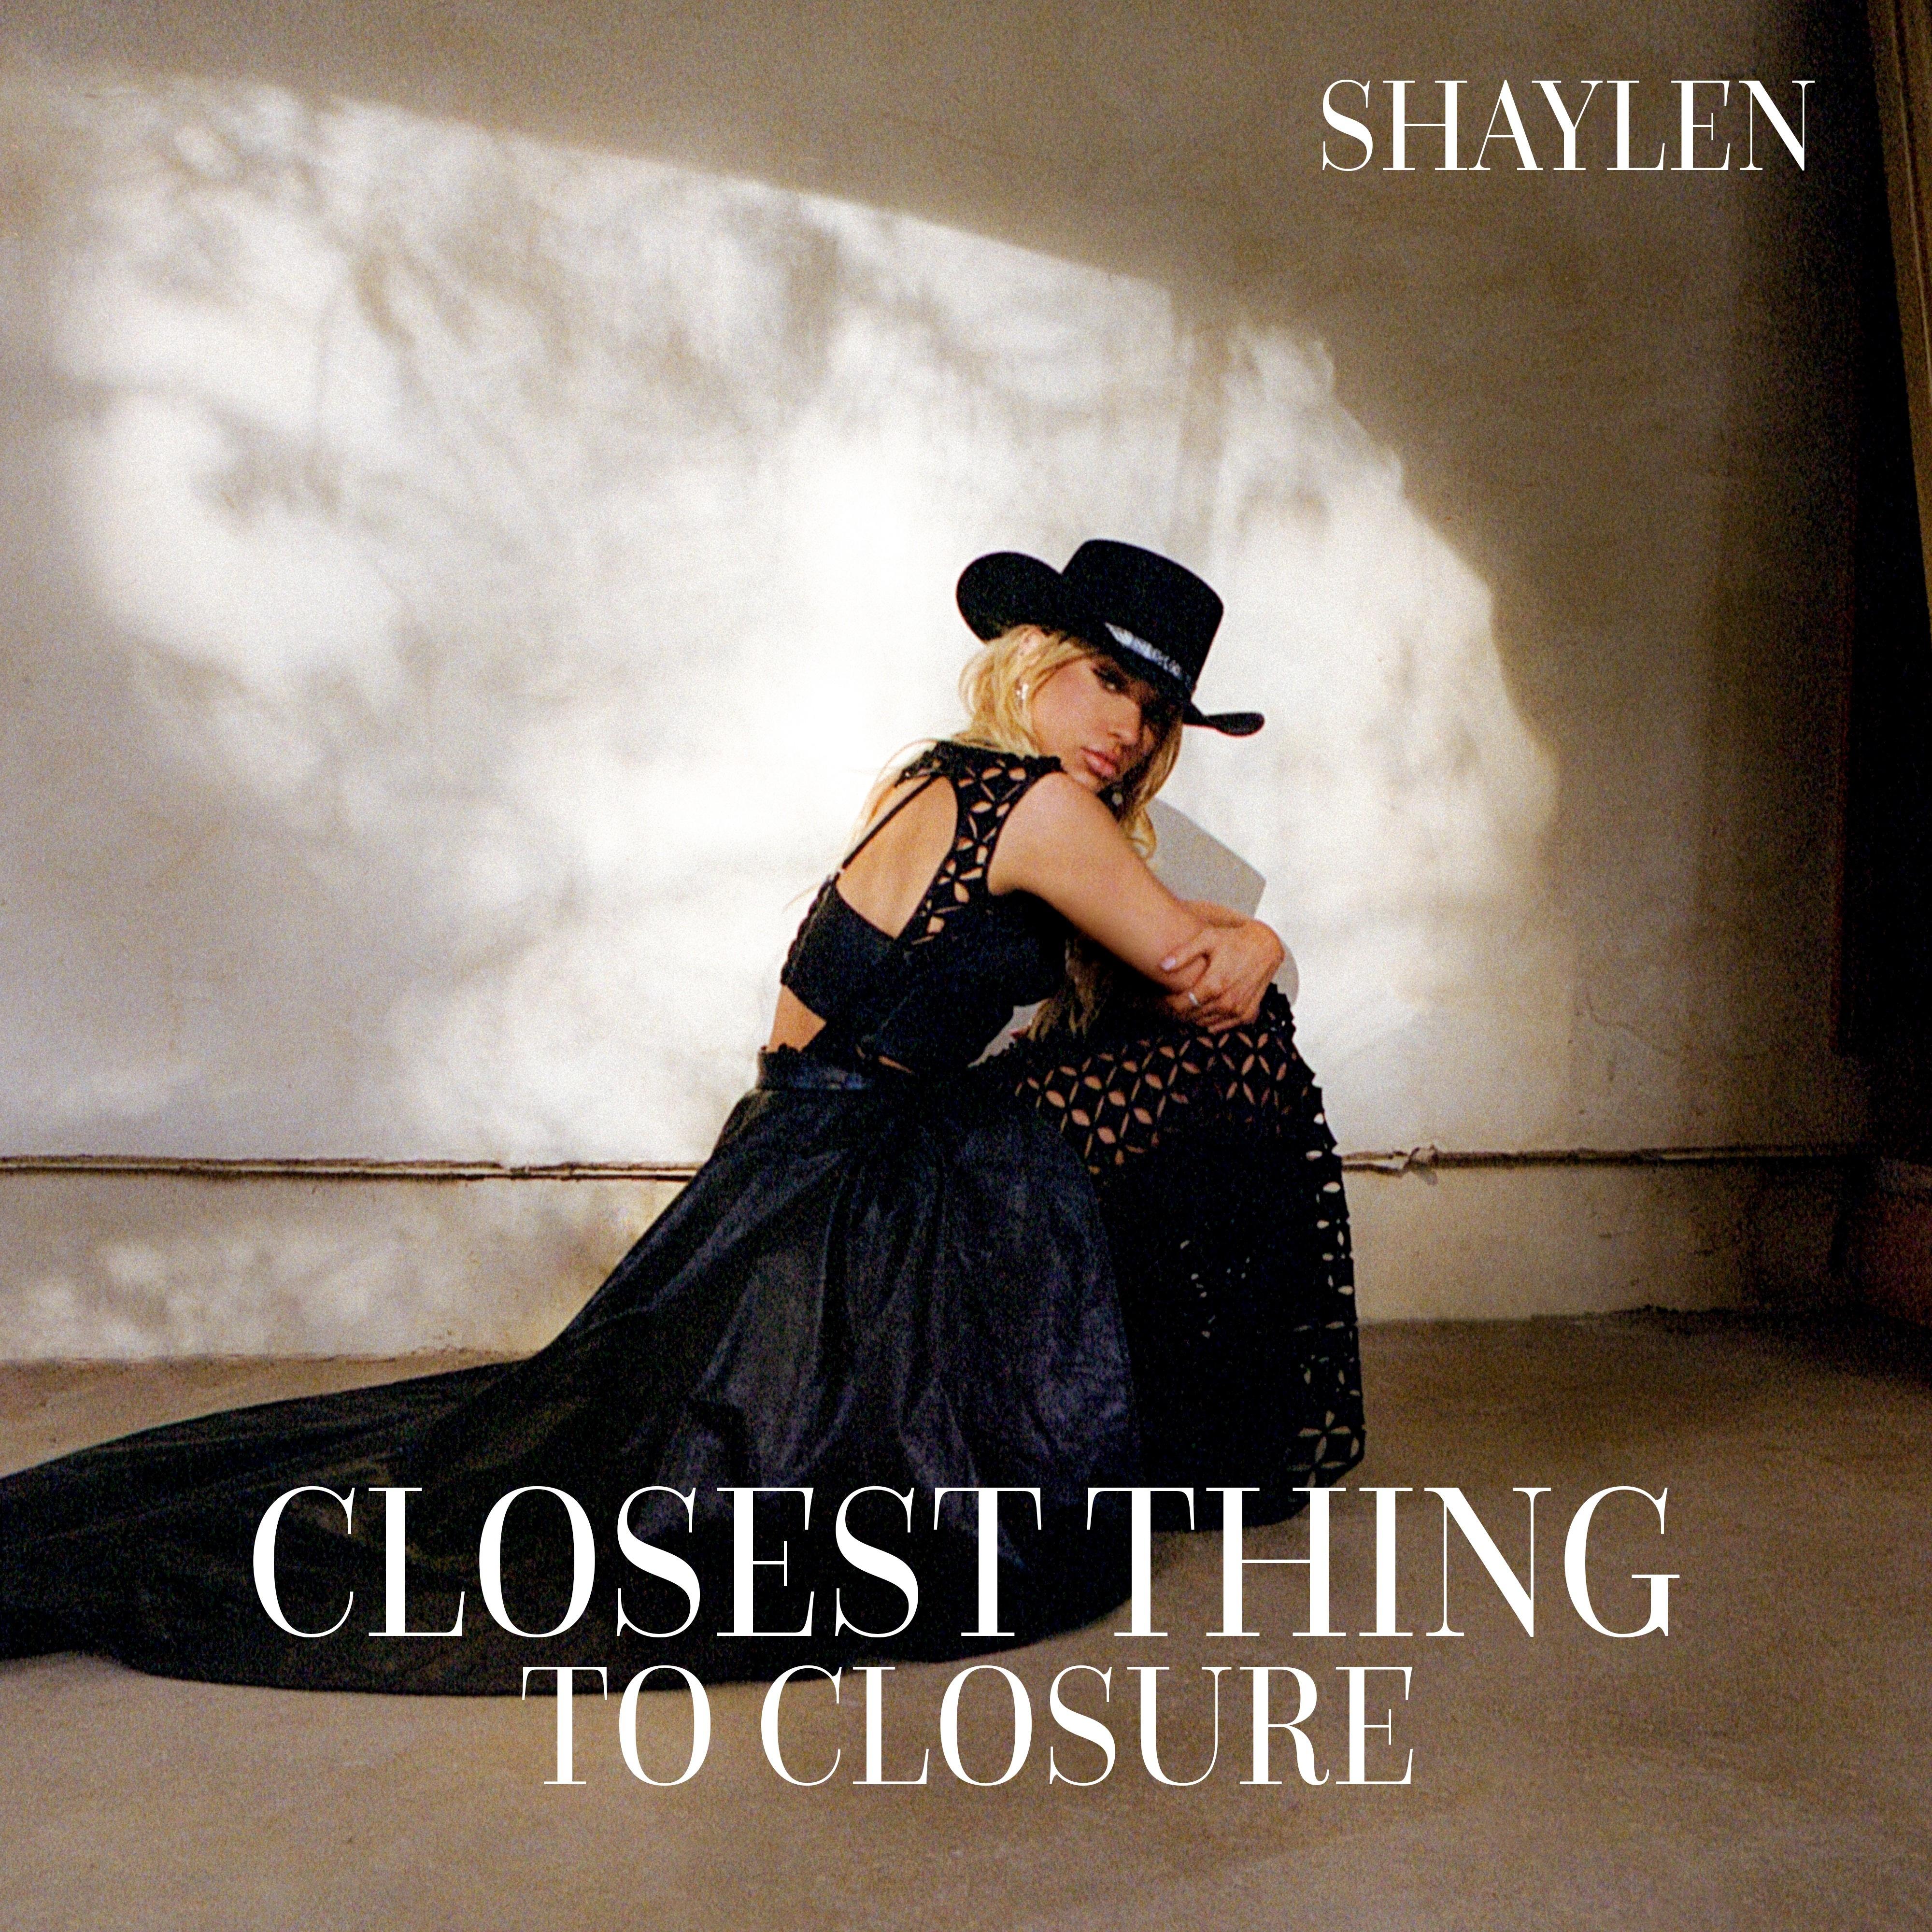 Shaylen - Closest thing to Closure